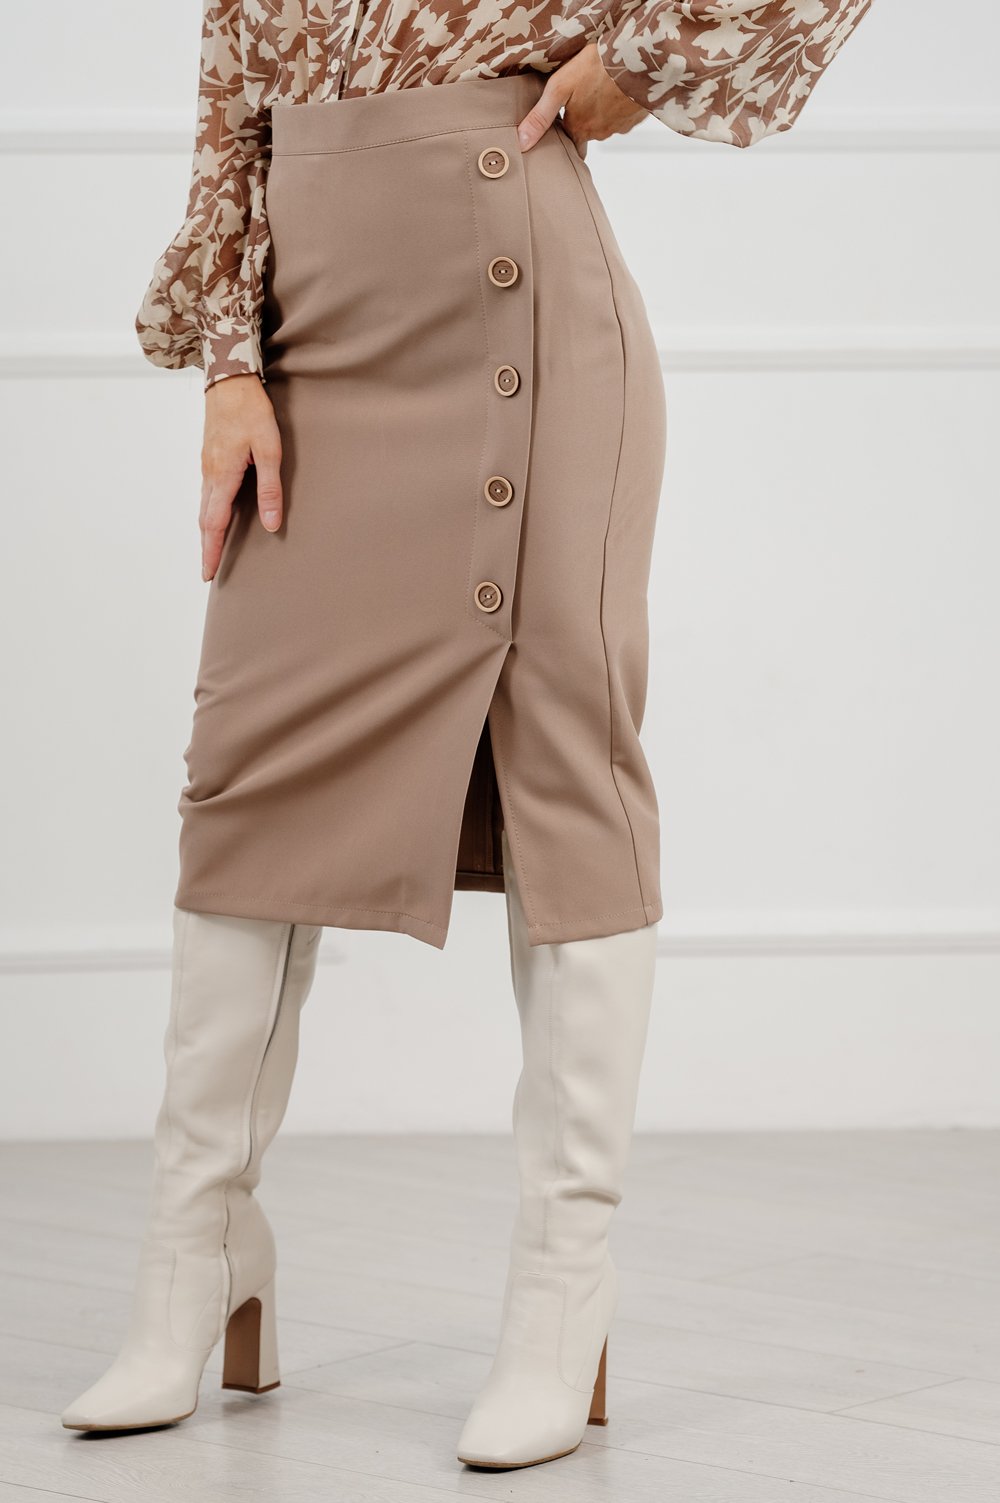 Beige midi skirt with fitted cut